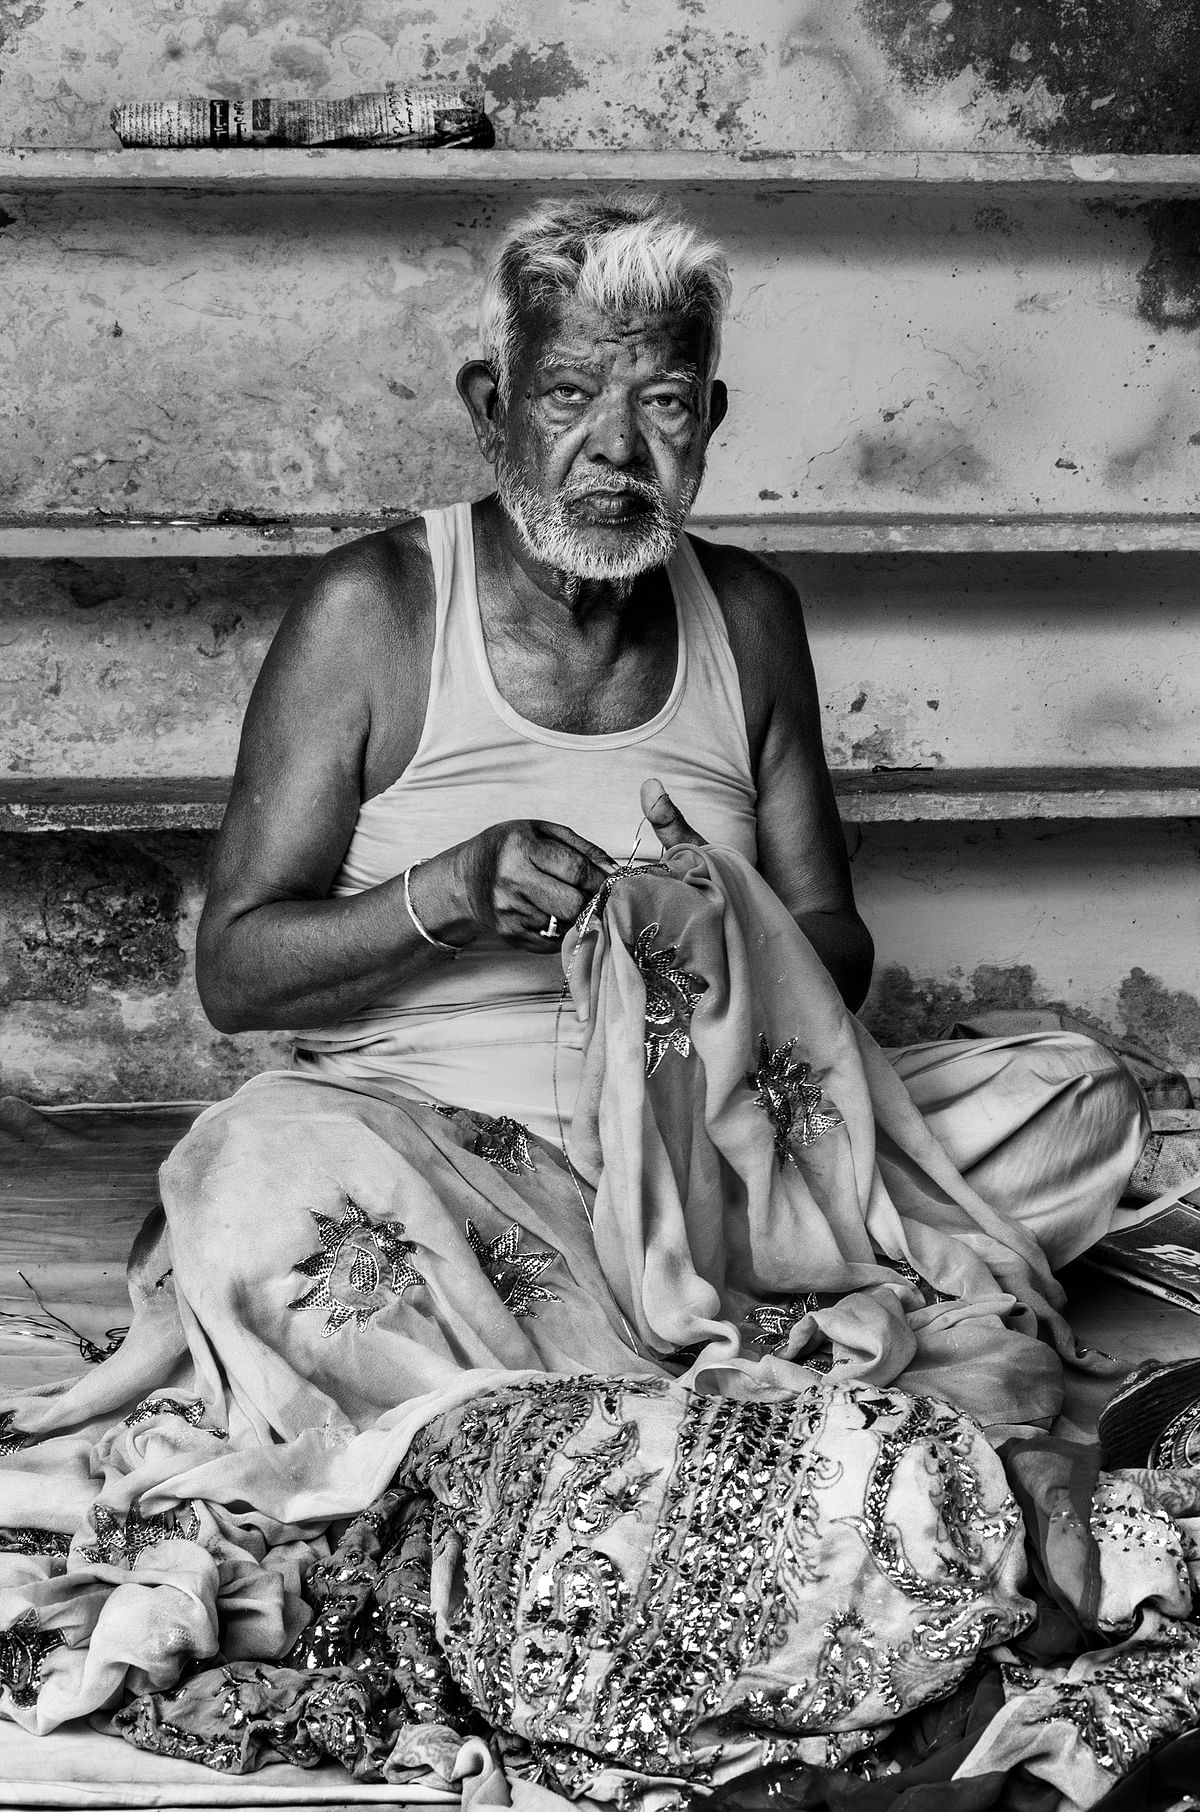 The story  of the Mukaish Badla artisans of Lucknow – their downfall, struggle and survival. 